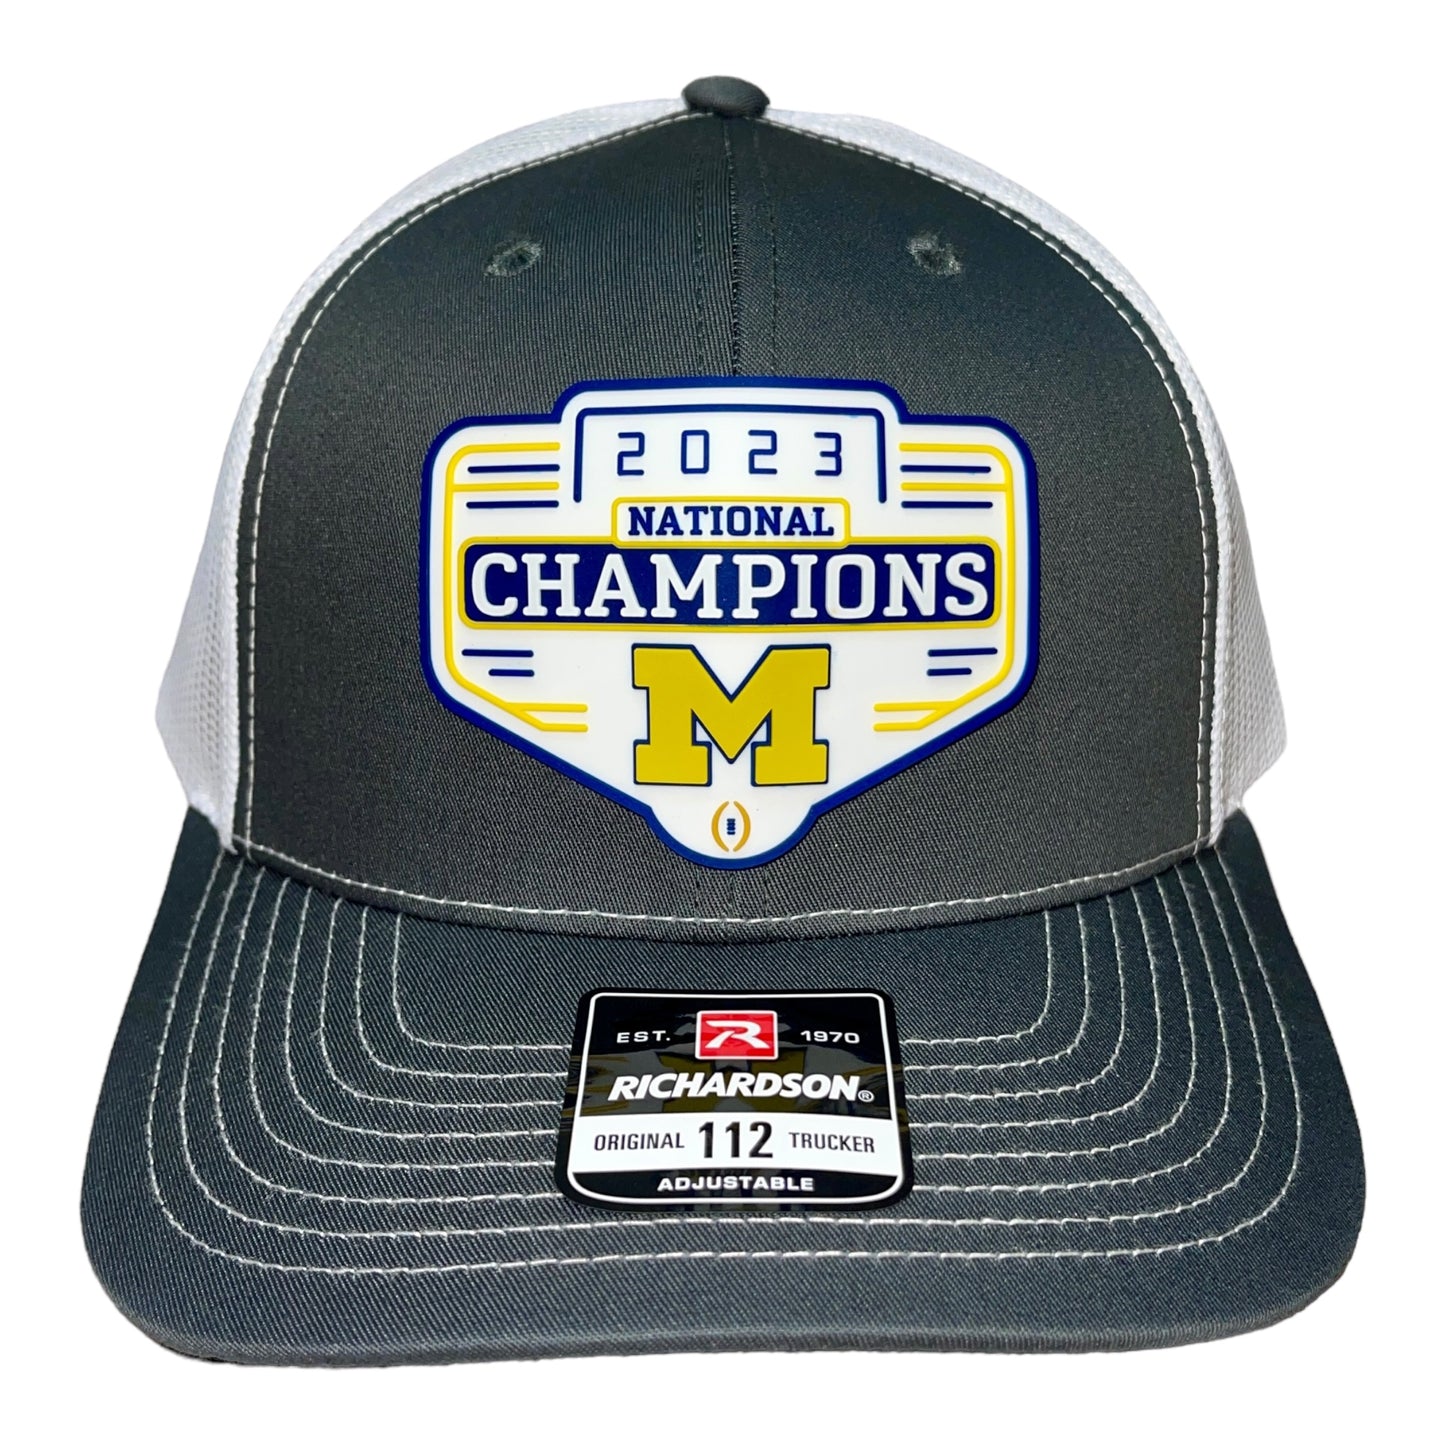 Michigan Wolverines 2023 National Champions 3D Snapback Trucker Hat- Charcoal/ White